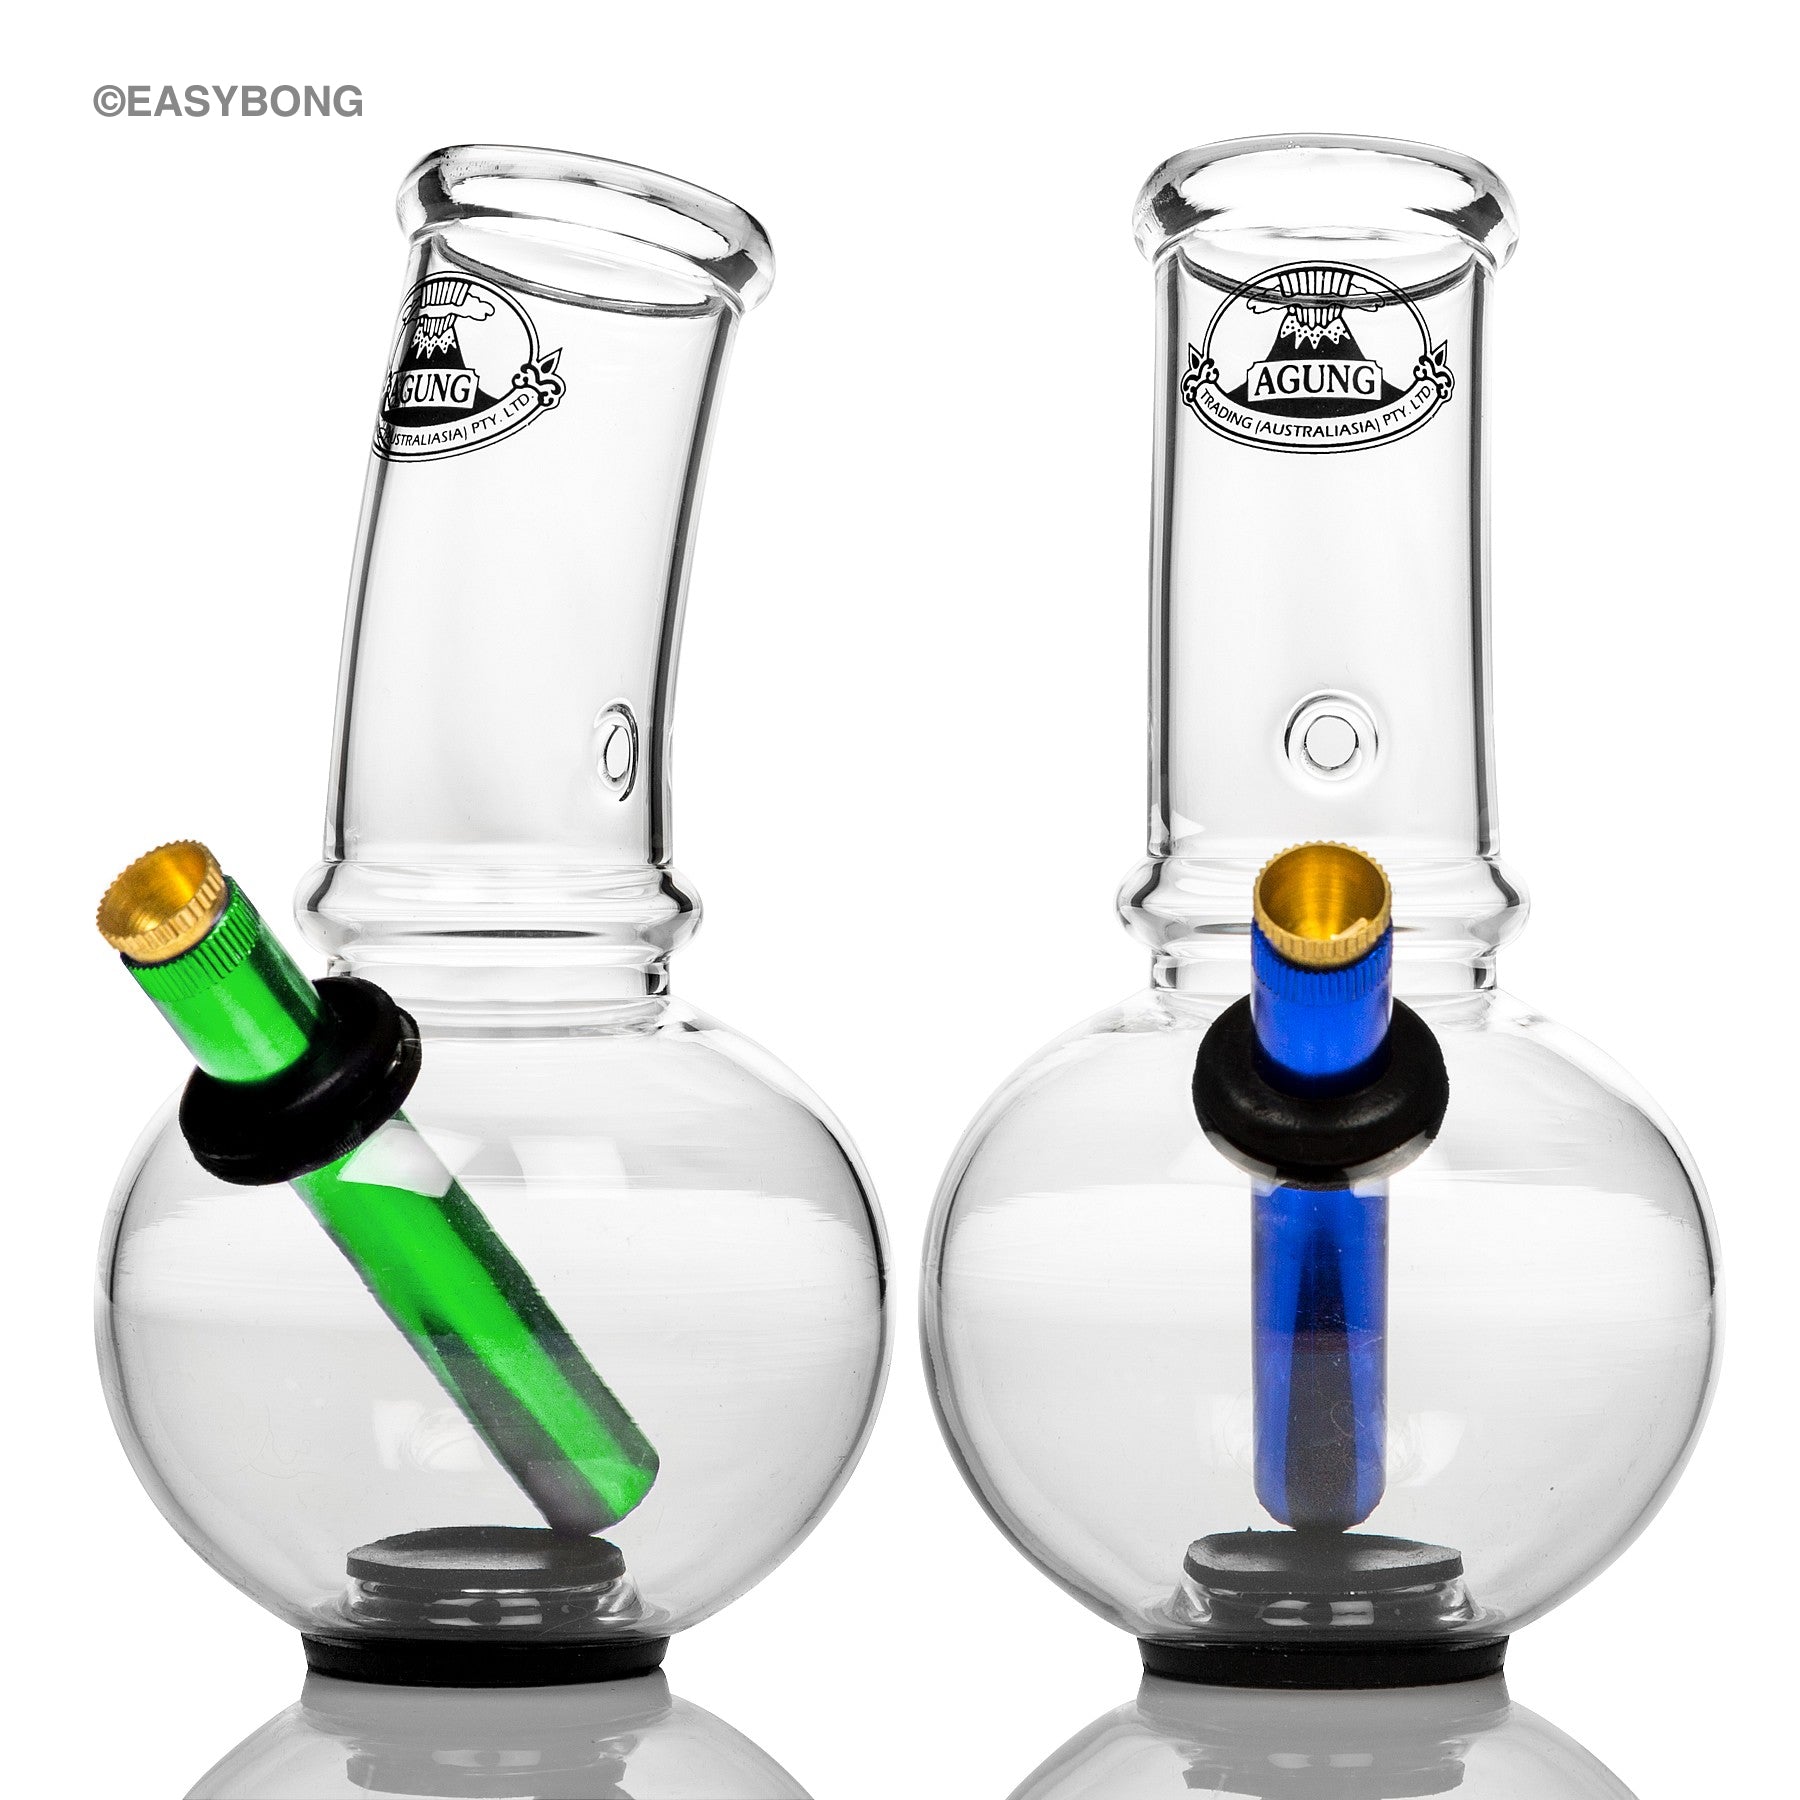 Agung small bubble bong with removable rubber base for cleaning.